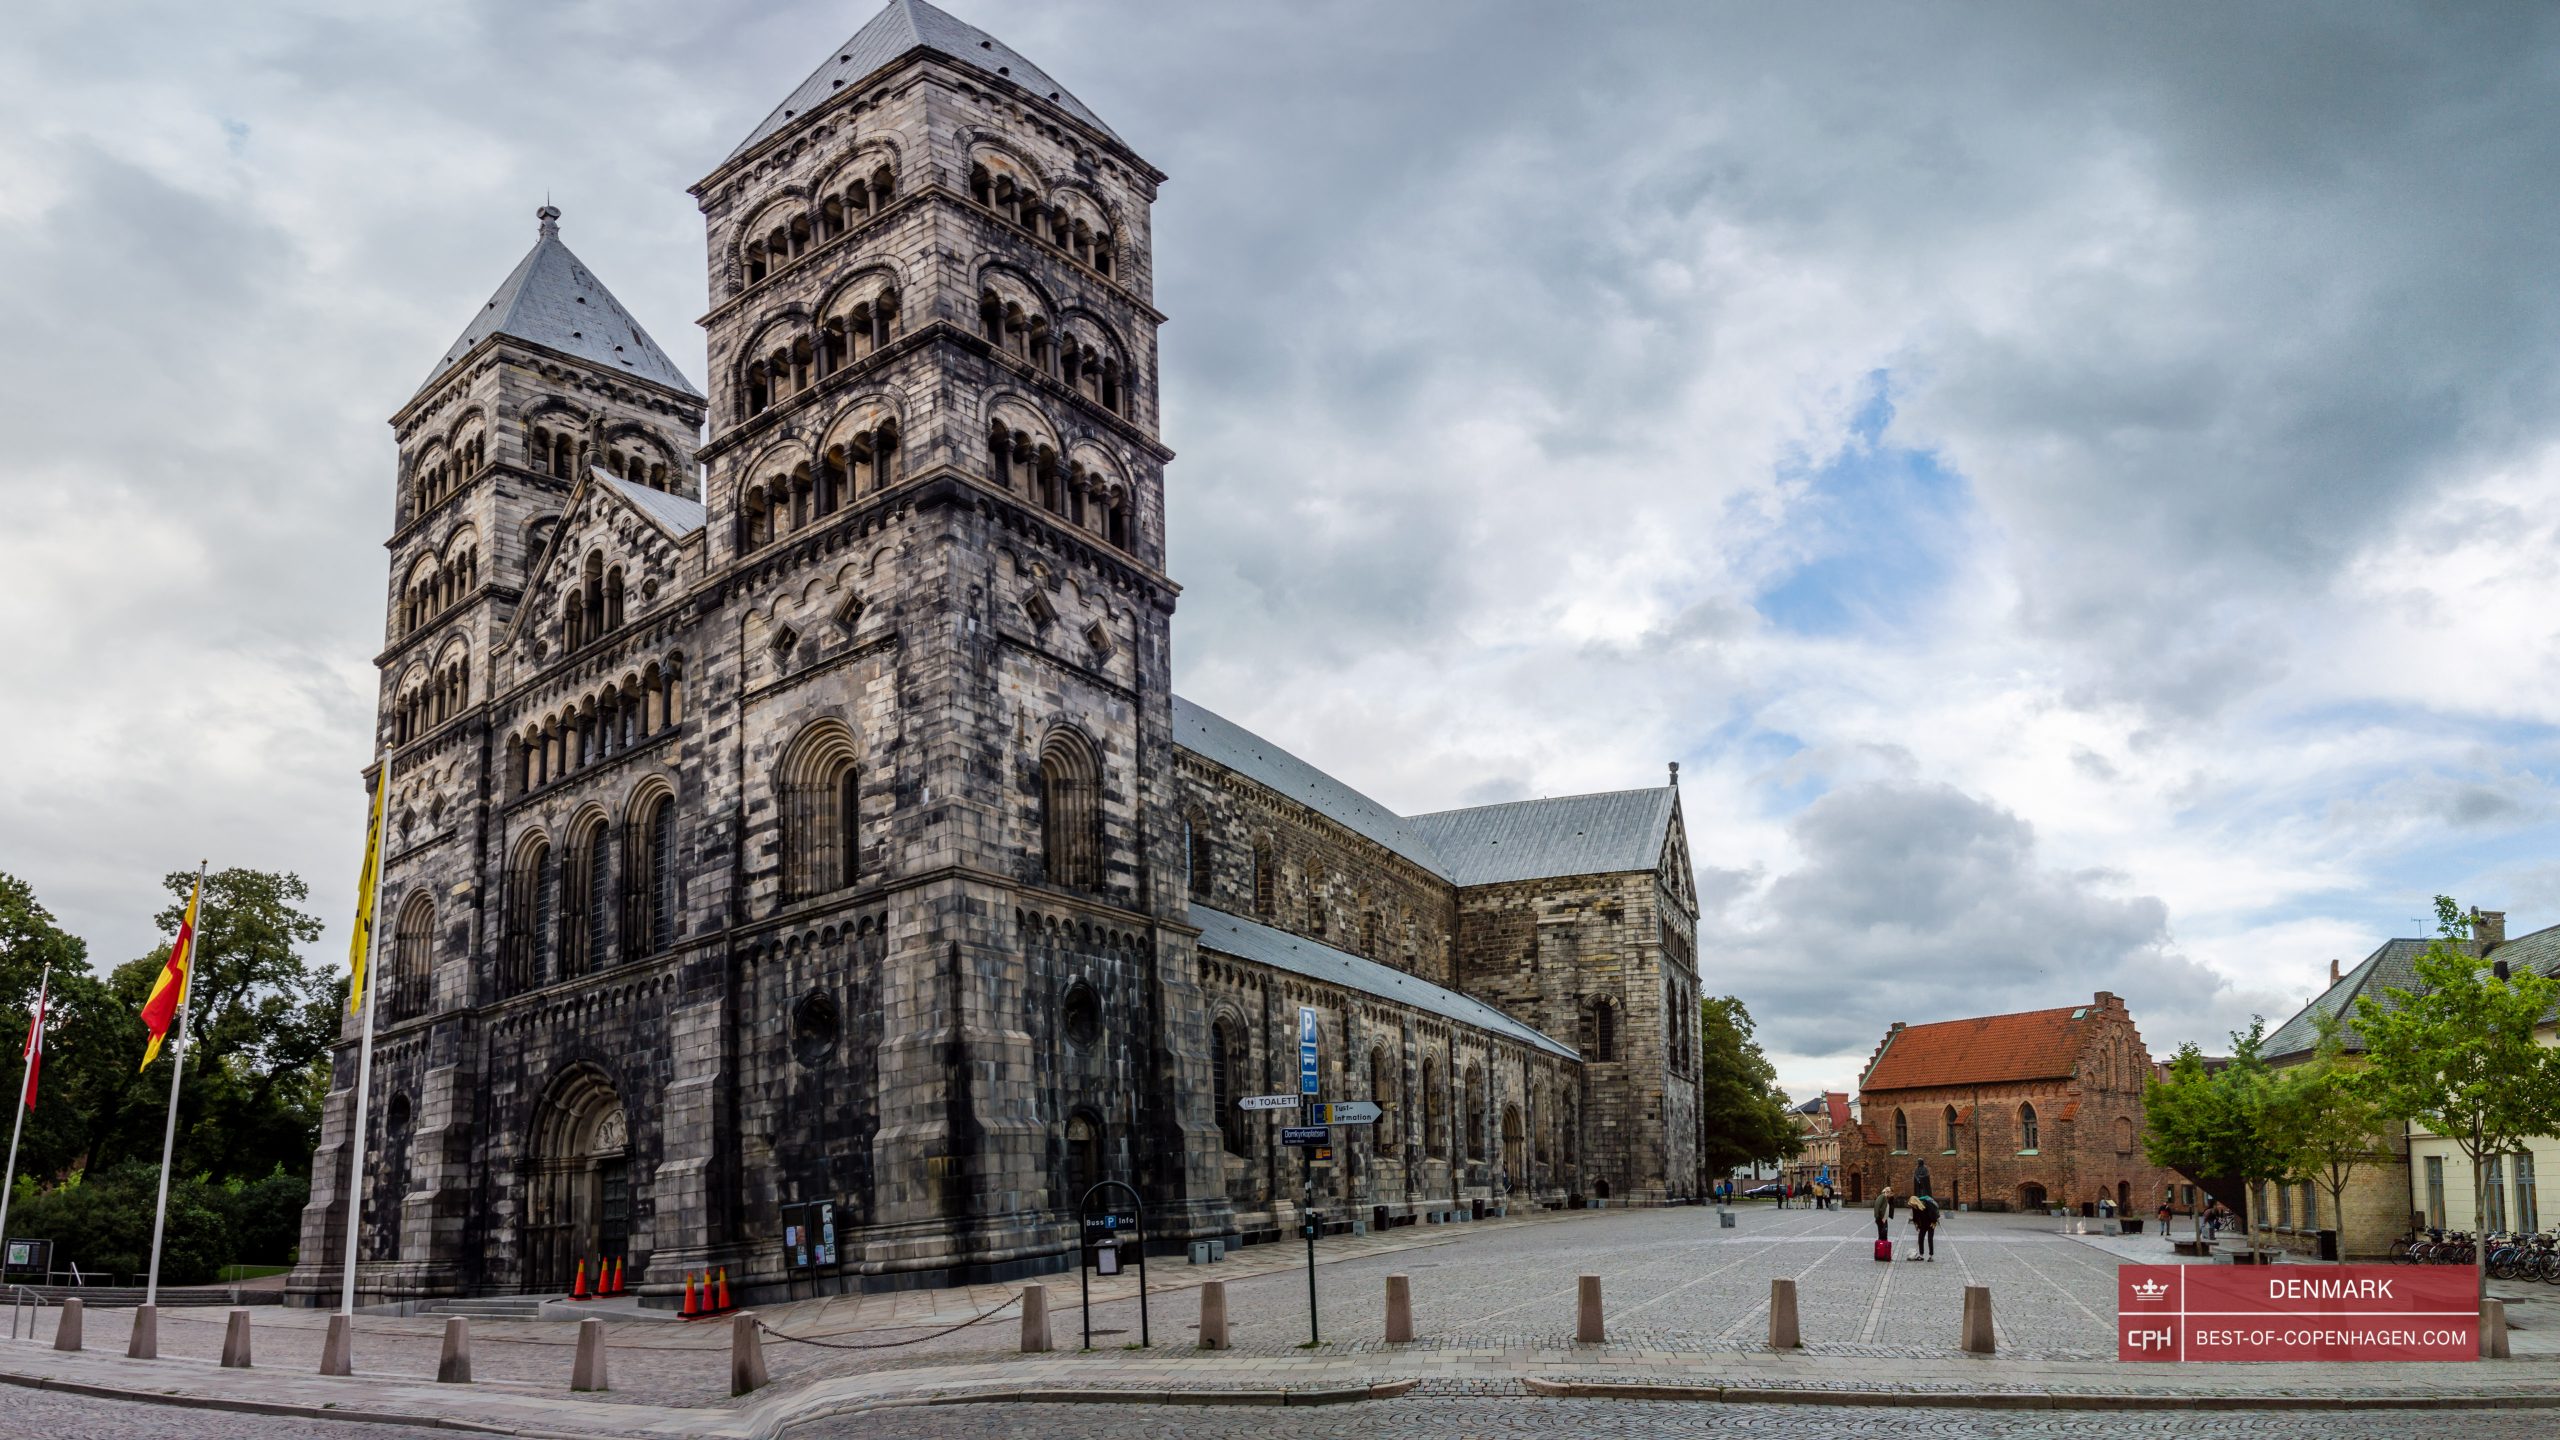 Cathedral in Lund, Sweden